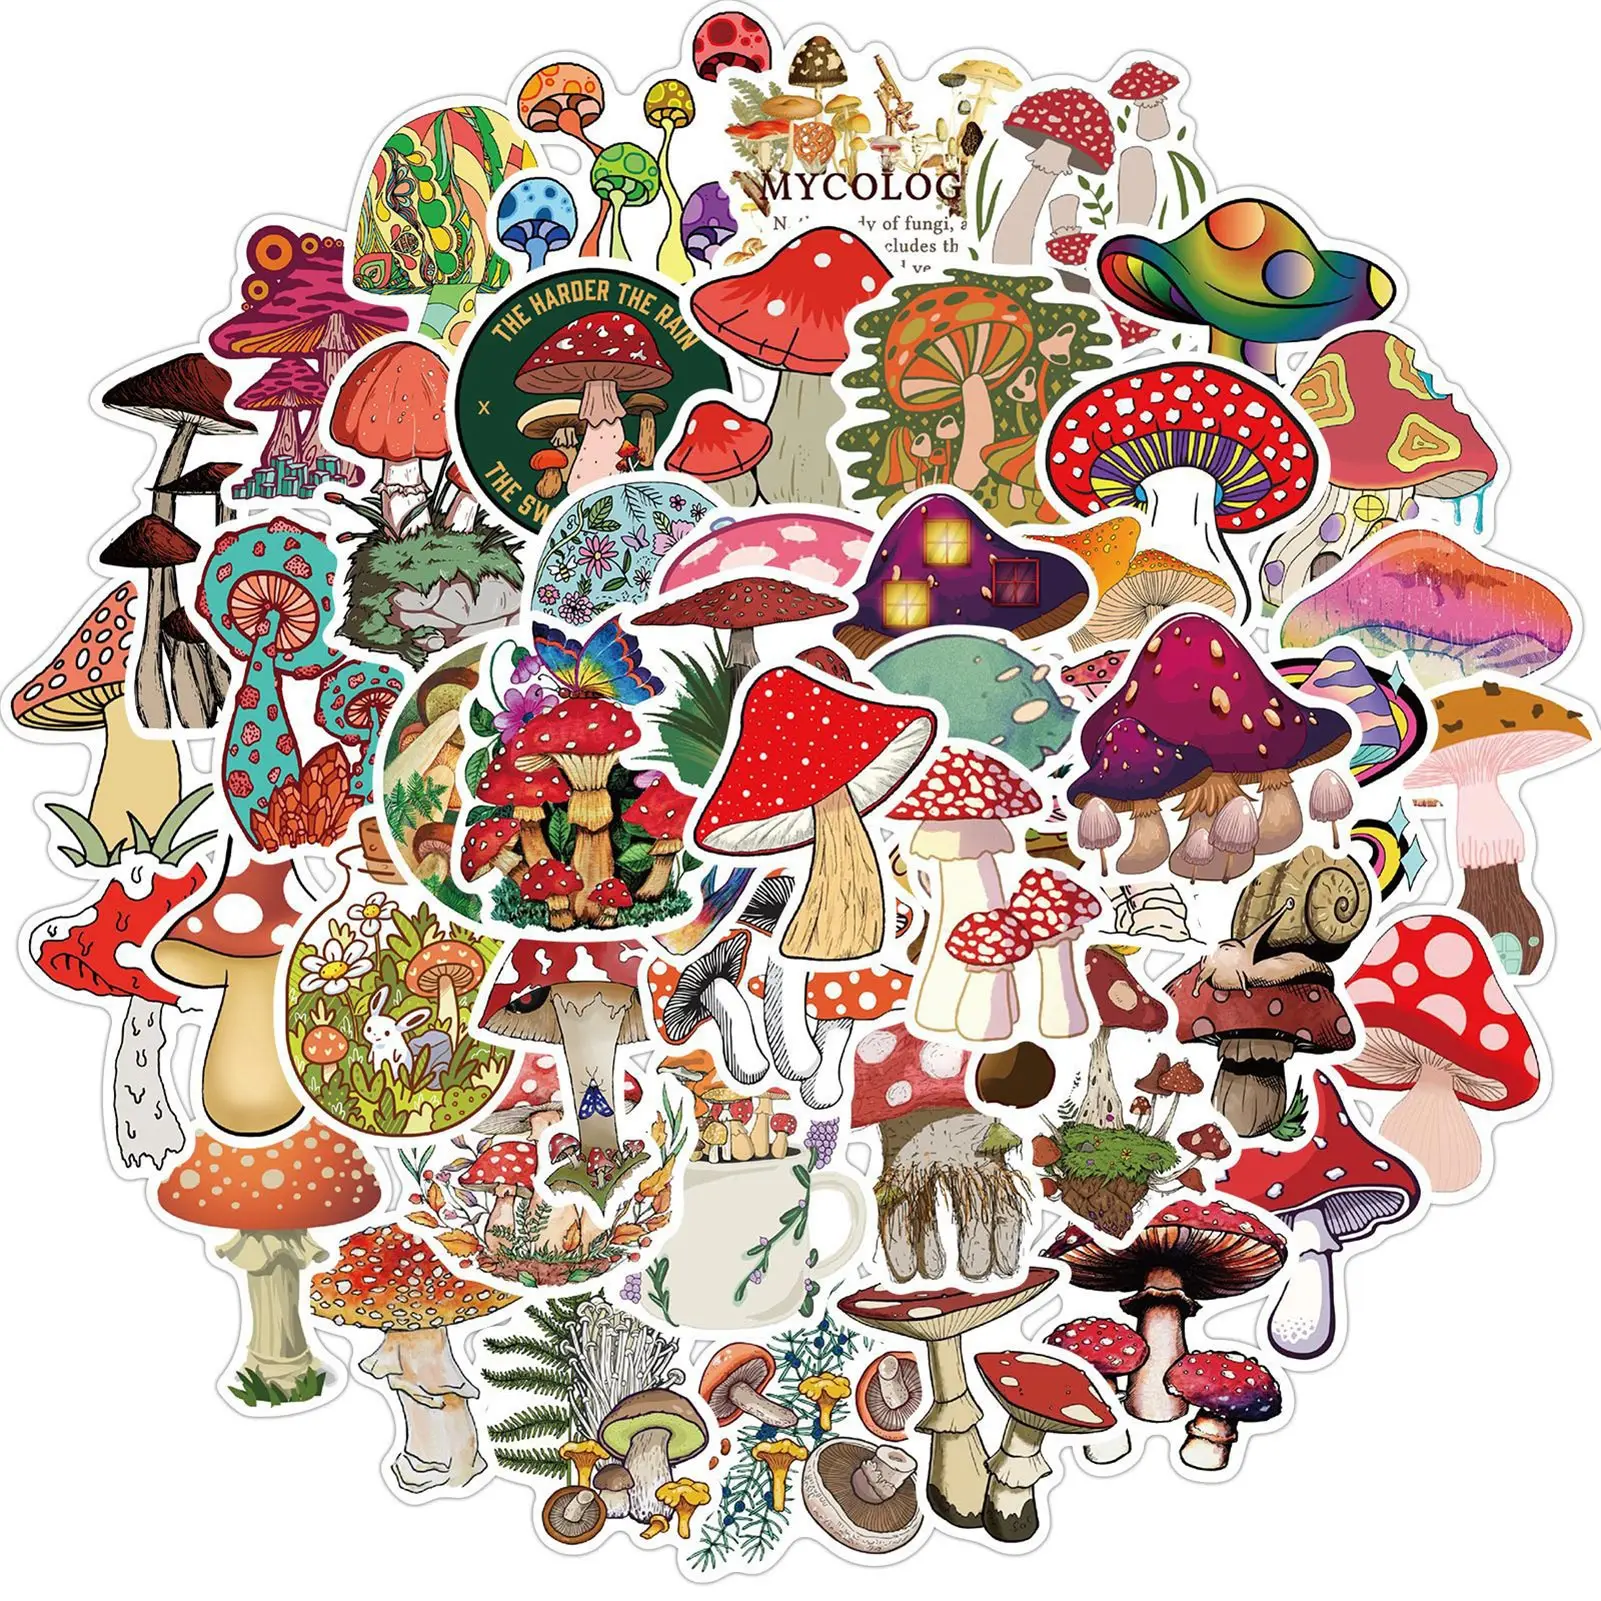 

50pcs Kawaii Paper Sticker Set Planet Coffee Flower Leaves Butterfly Mushroom Decorative Stickers For Srapbooking Album Planner